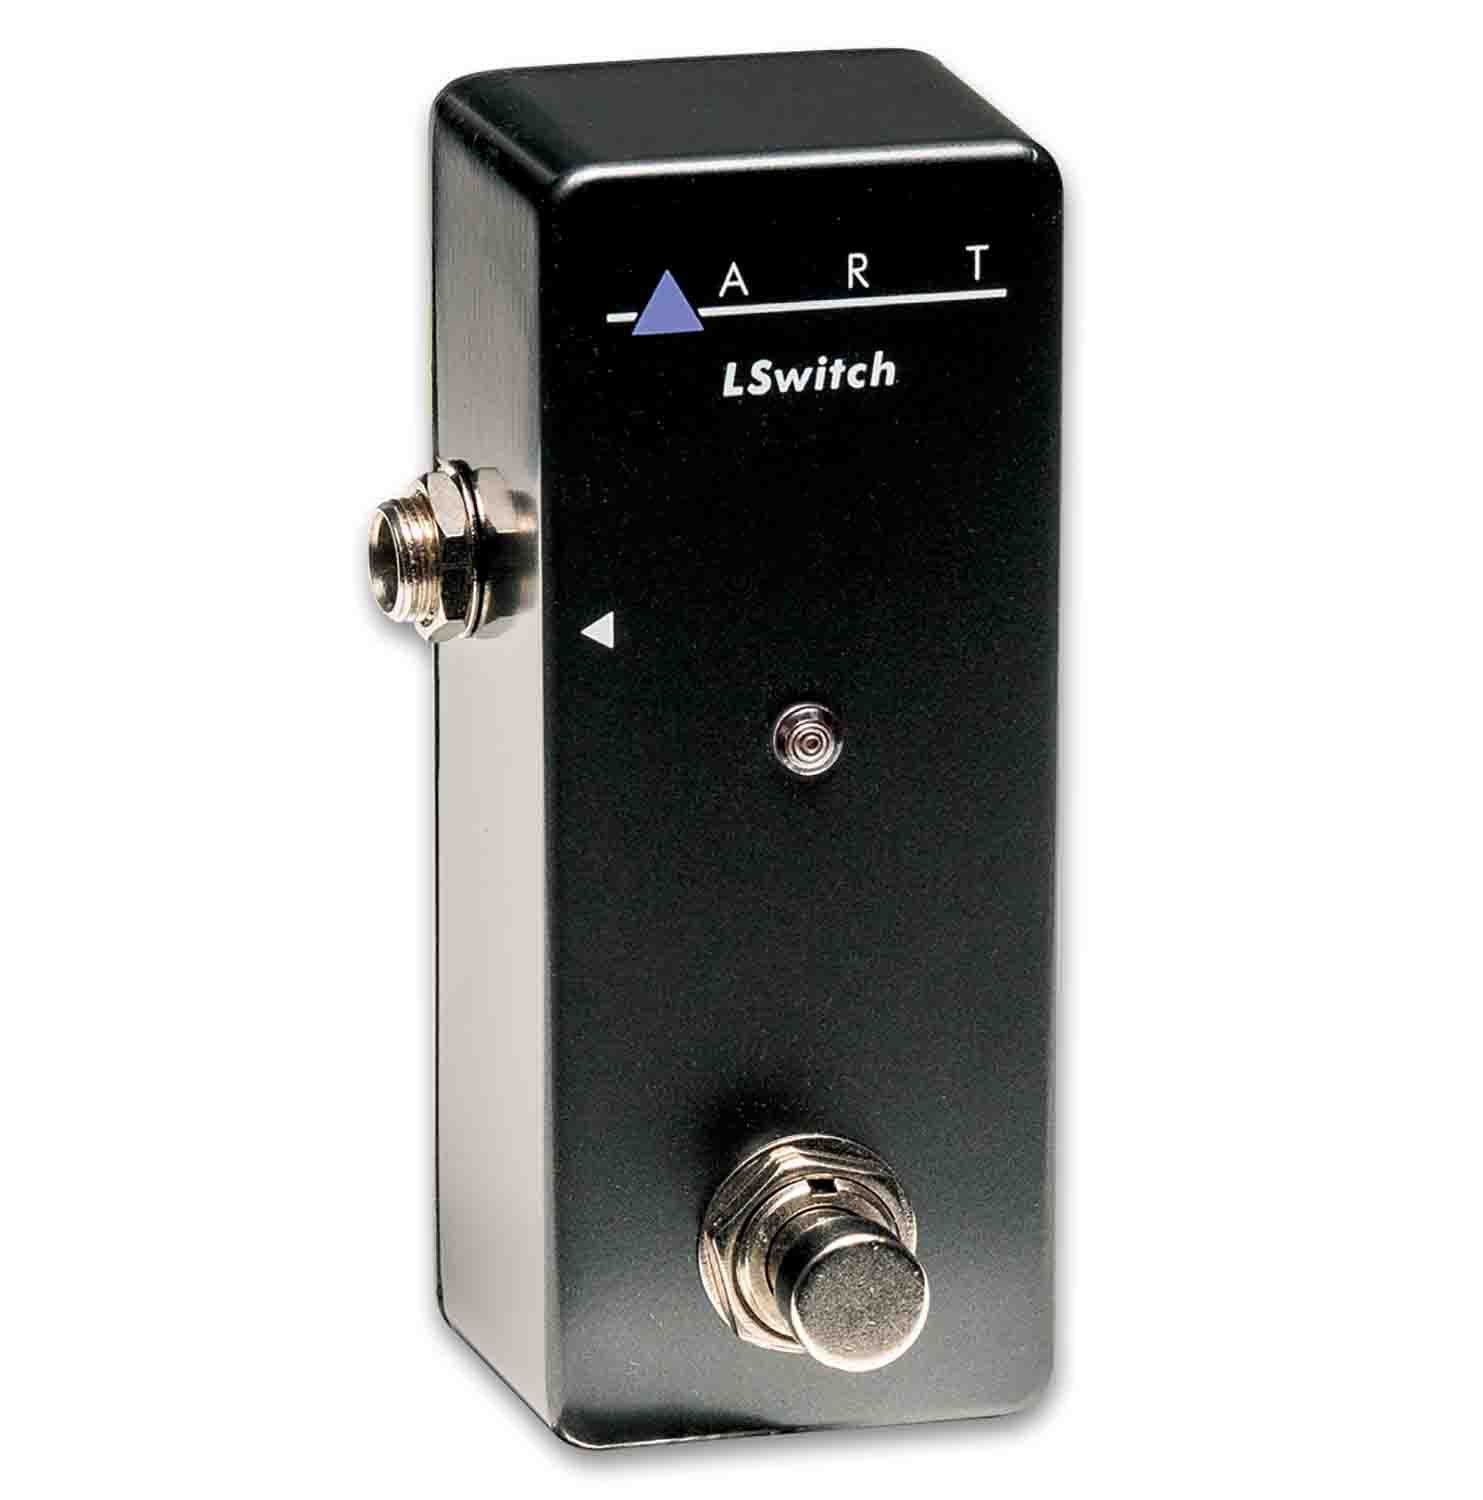 Art LSWITCH Latching Switch for Effects or Amps - Hollywood DJ